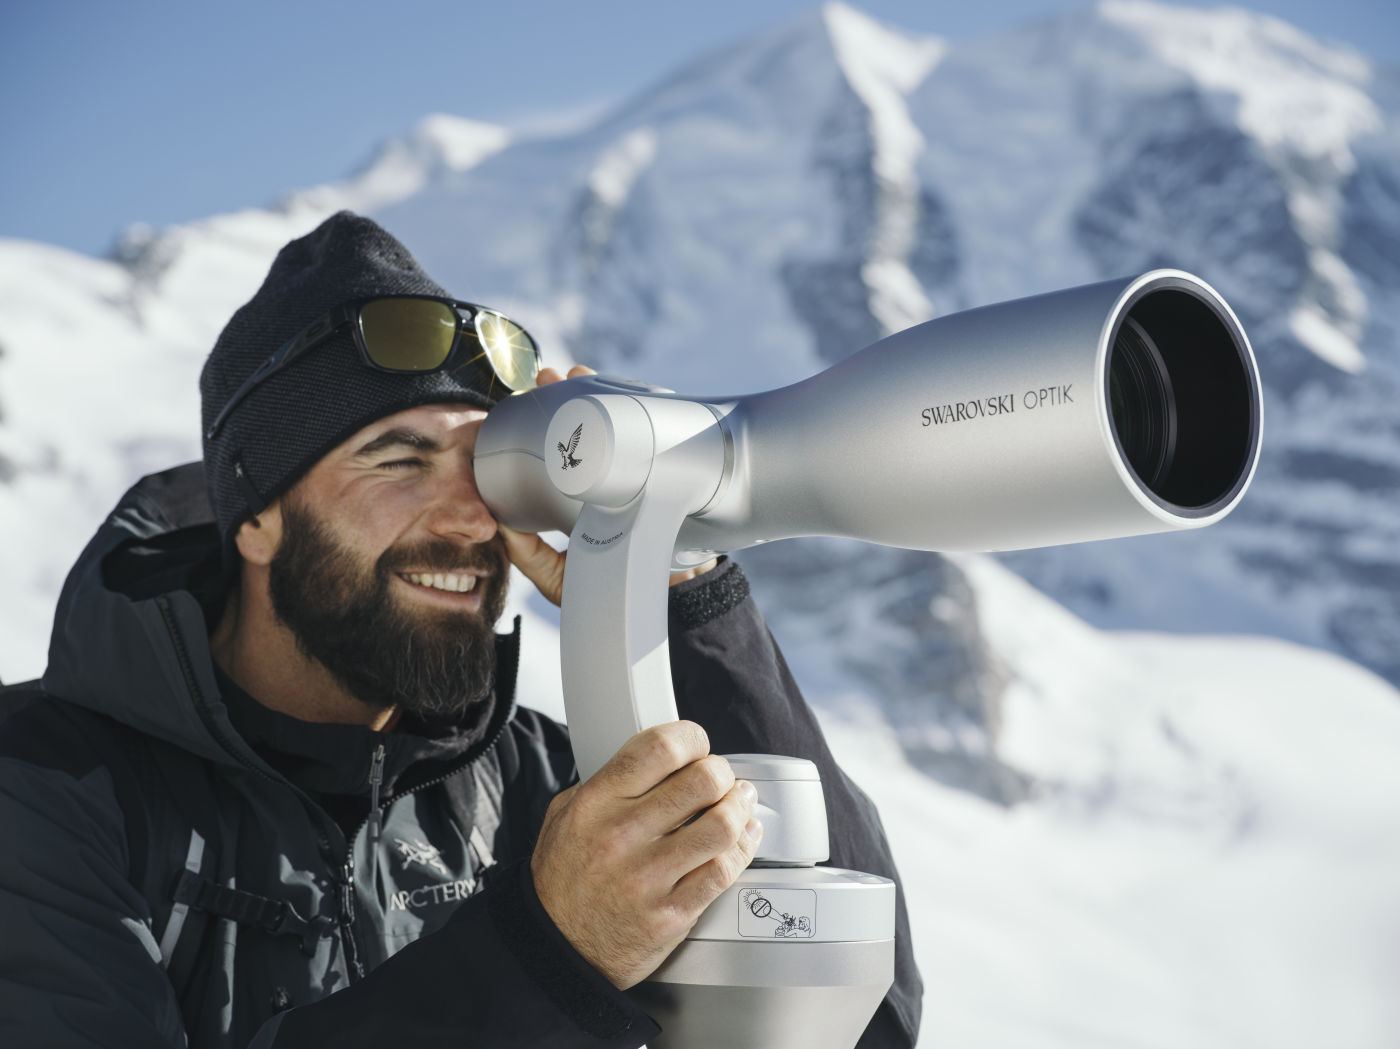 The ST Vista outdoor spotting scope provides breathtaking viewpoints in Diavolezza, Switzerland.